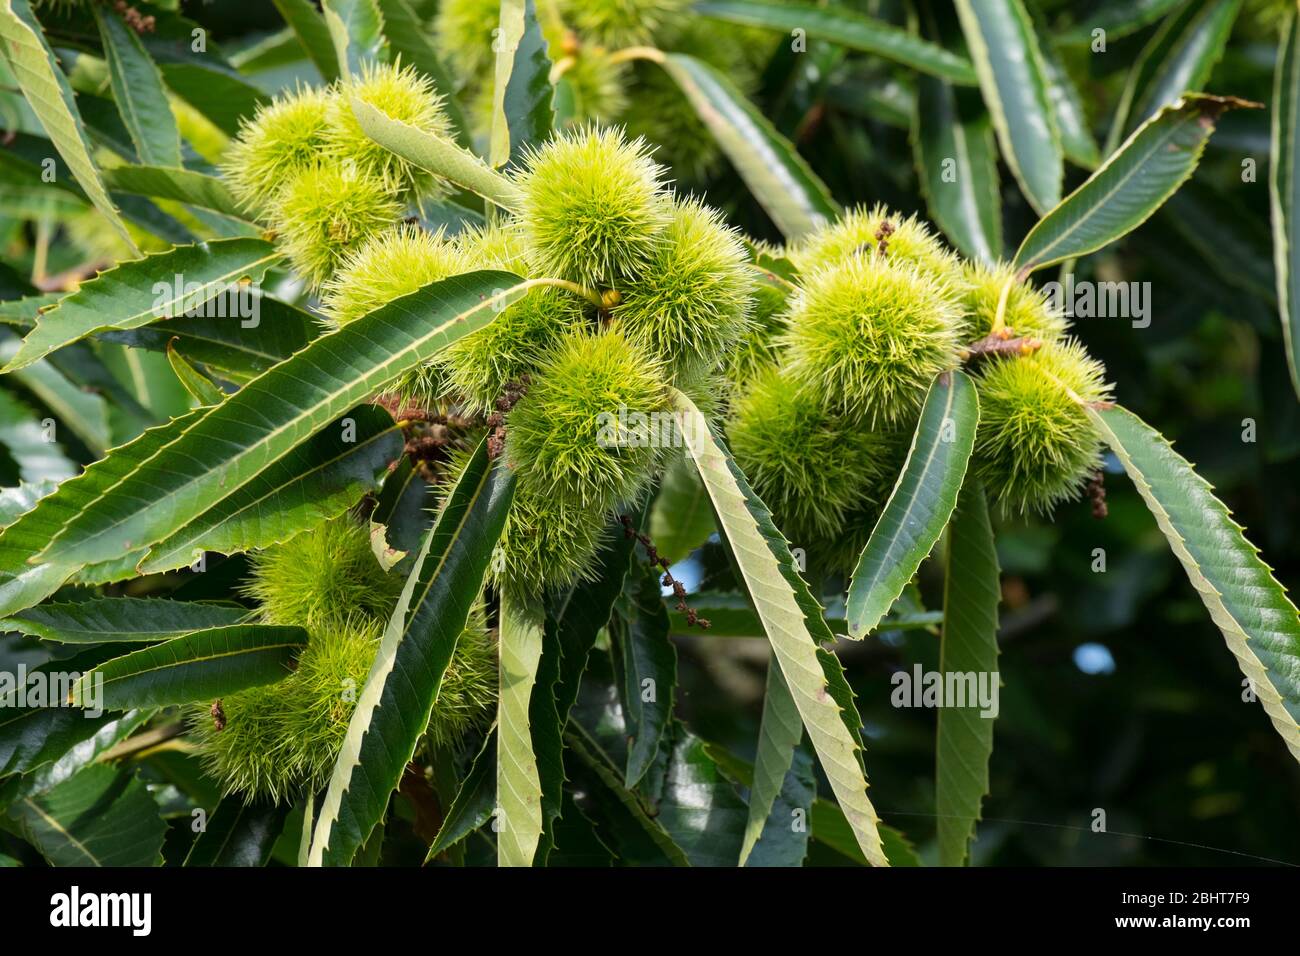 Sweet chestnut - Castanea sativa, showing the fresh spiky  seed cases, Stock Photo